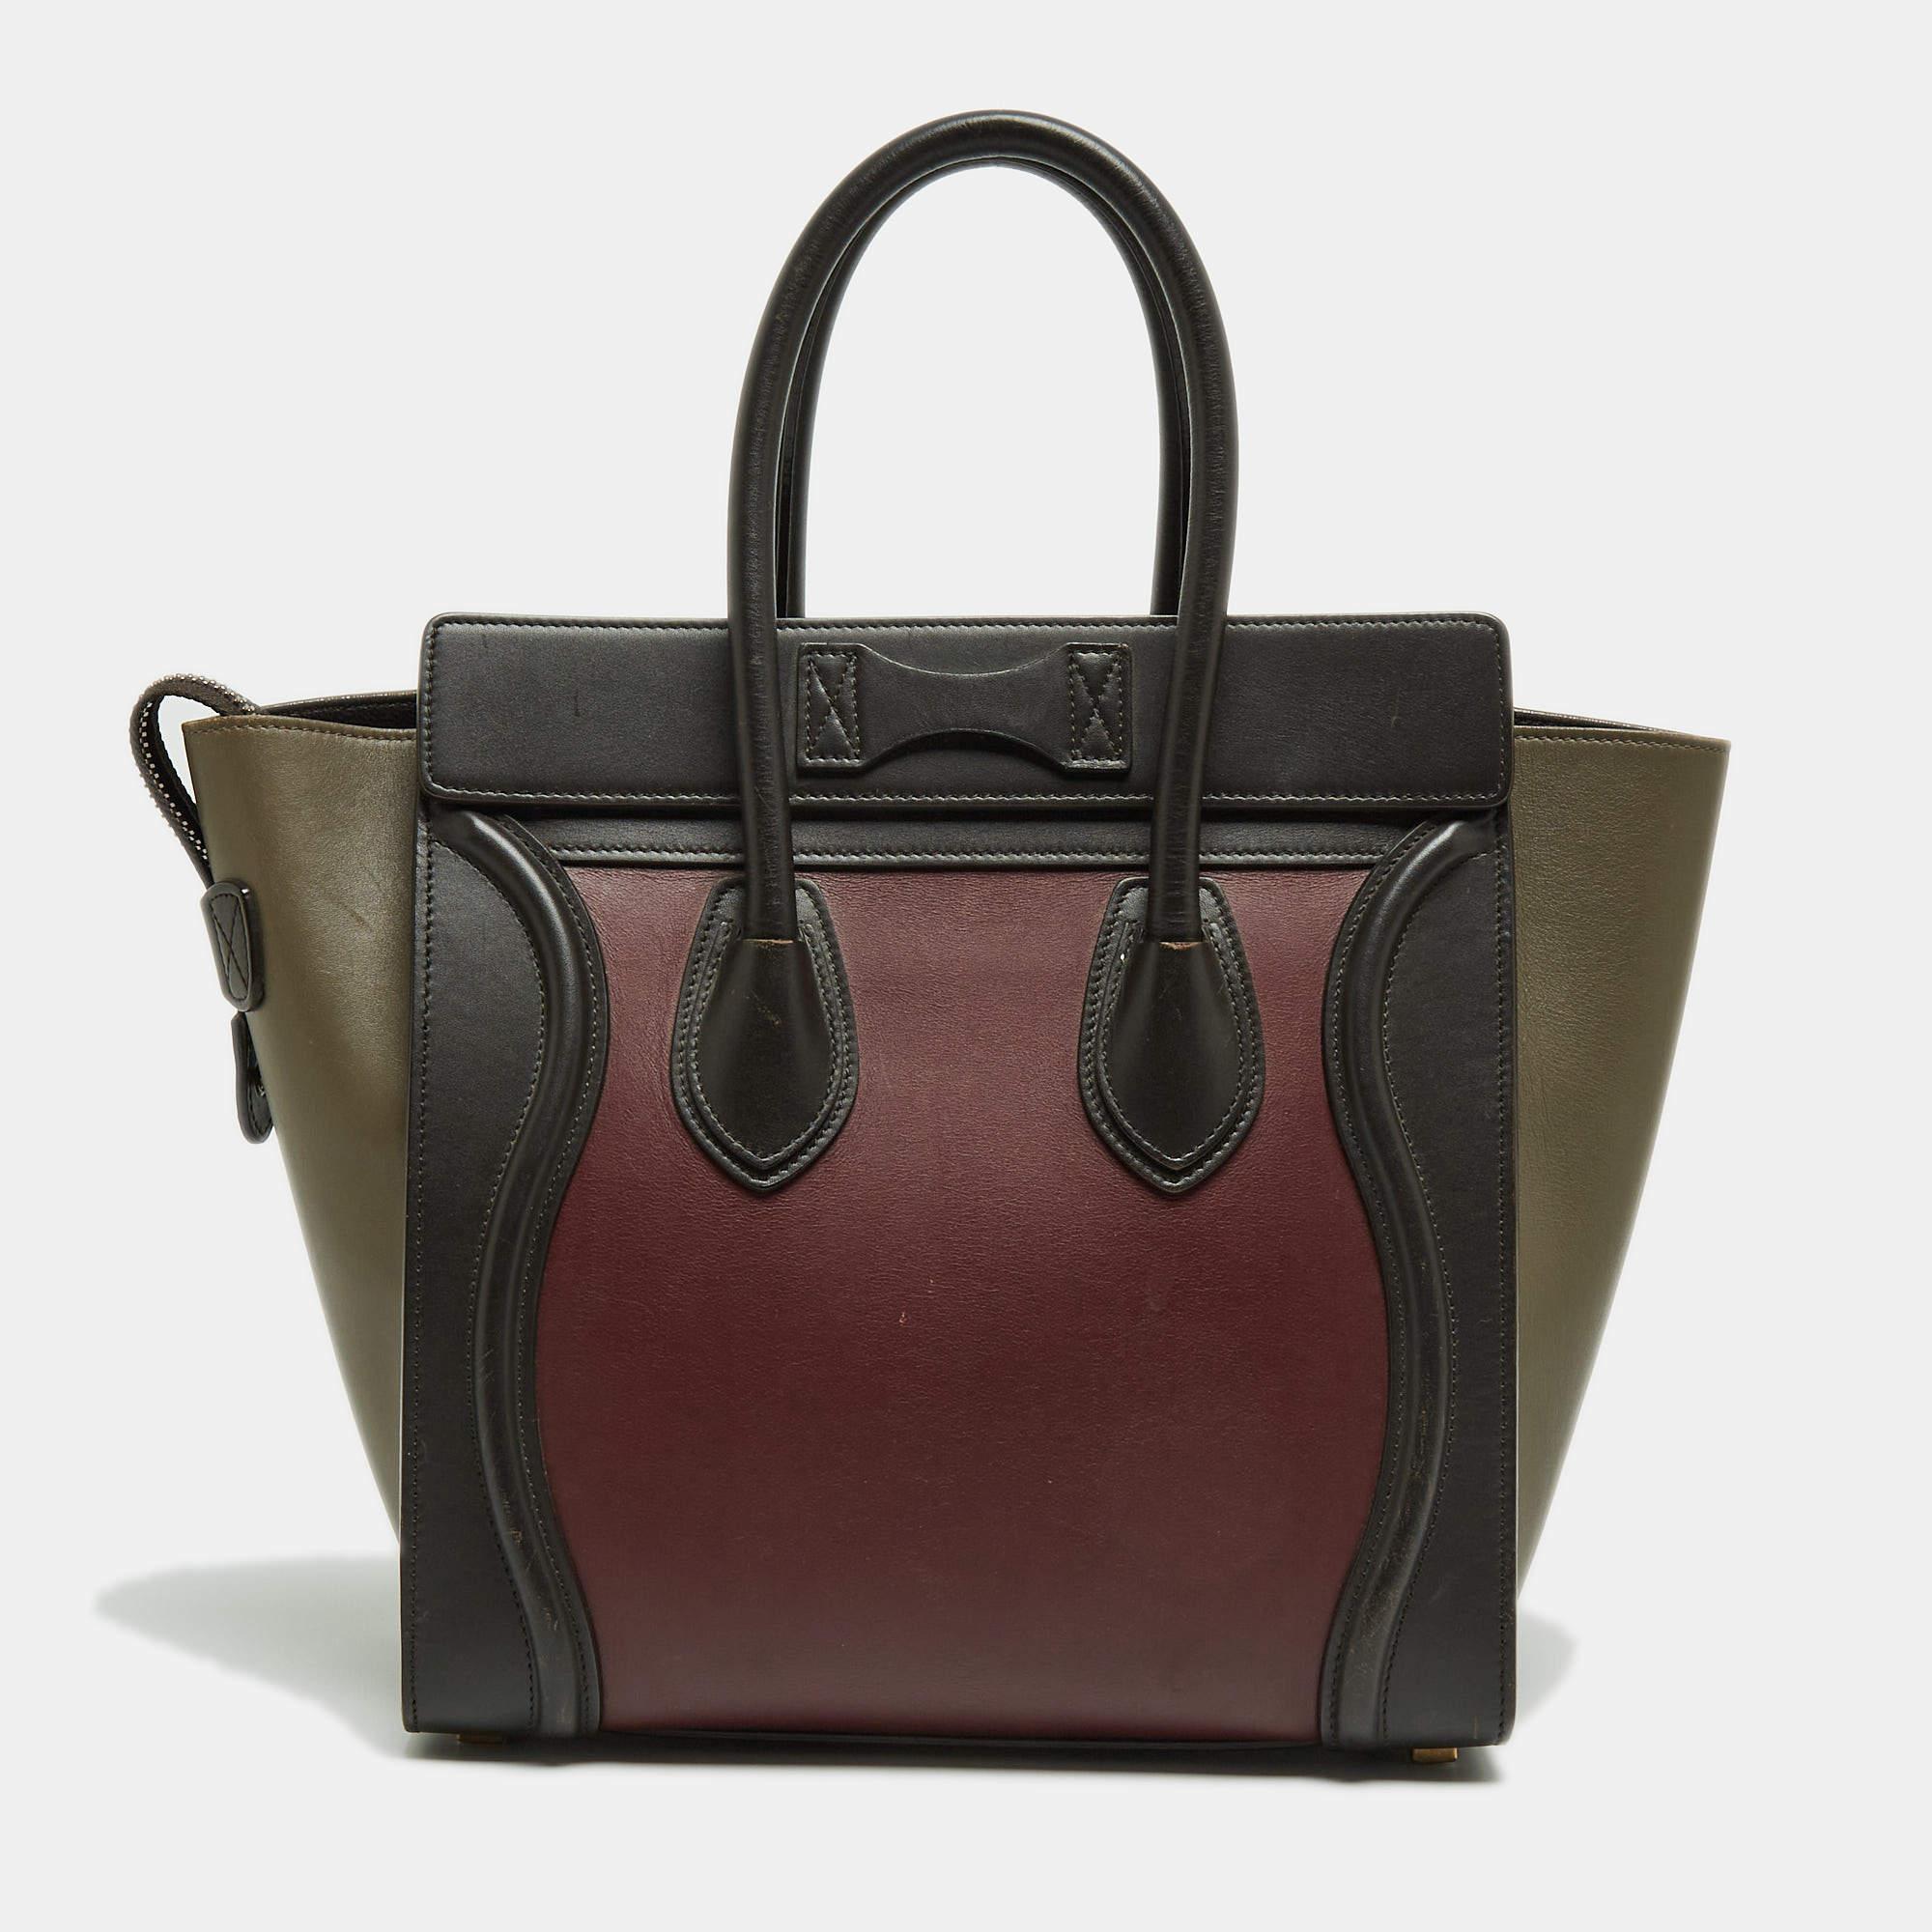 Striking a beautiful balance between essentiality and opulence, this tote from the House of Celine ensures that your handbag requirements are taken care of. It is equipped with practical features for all-day ease.

